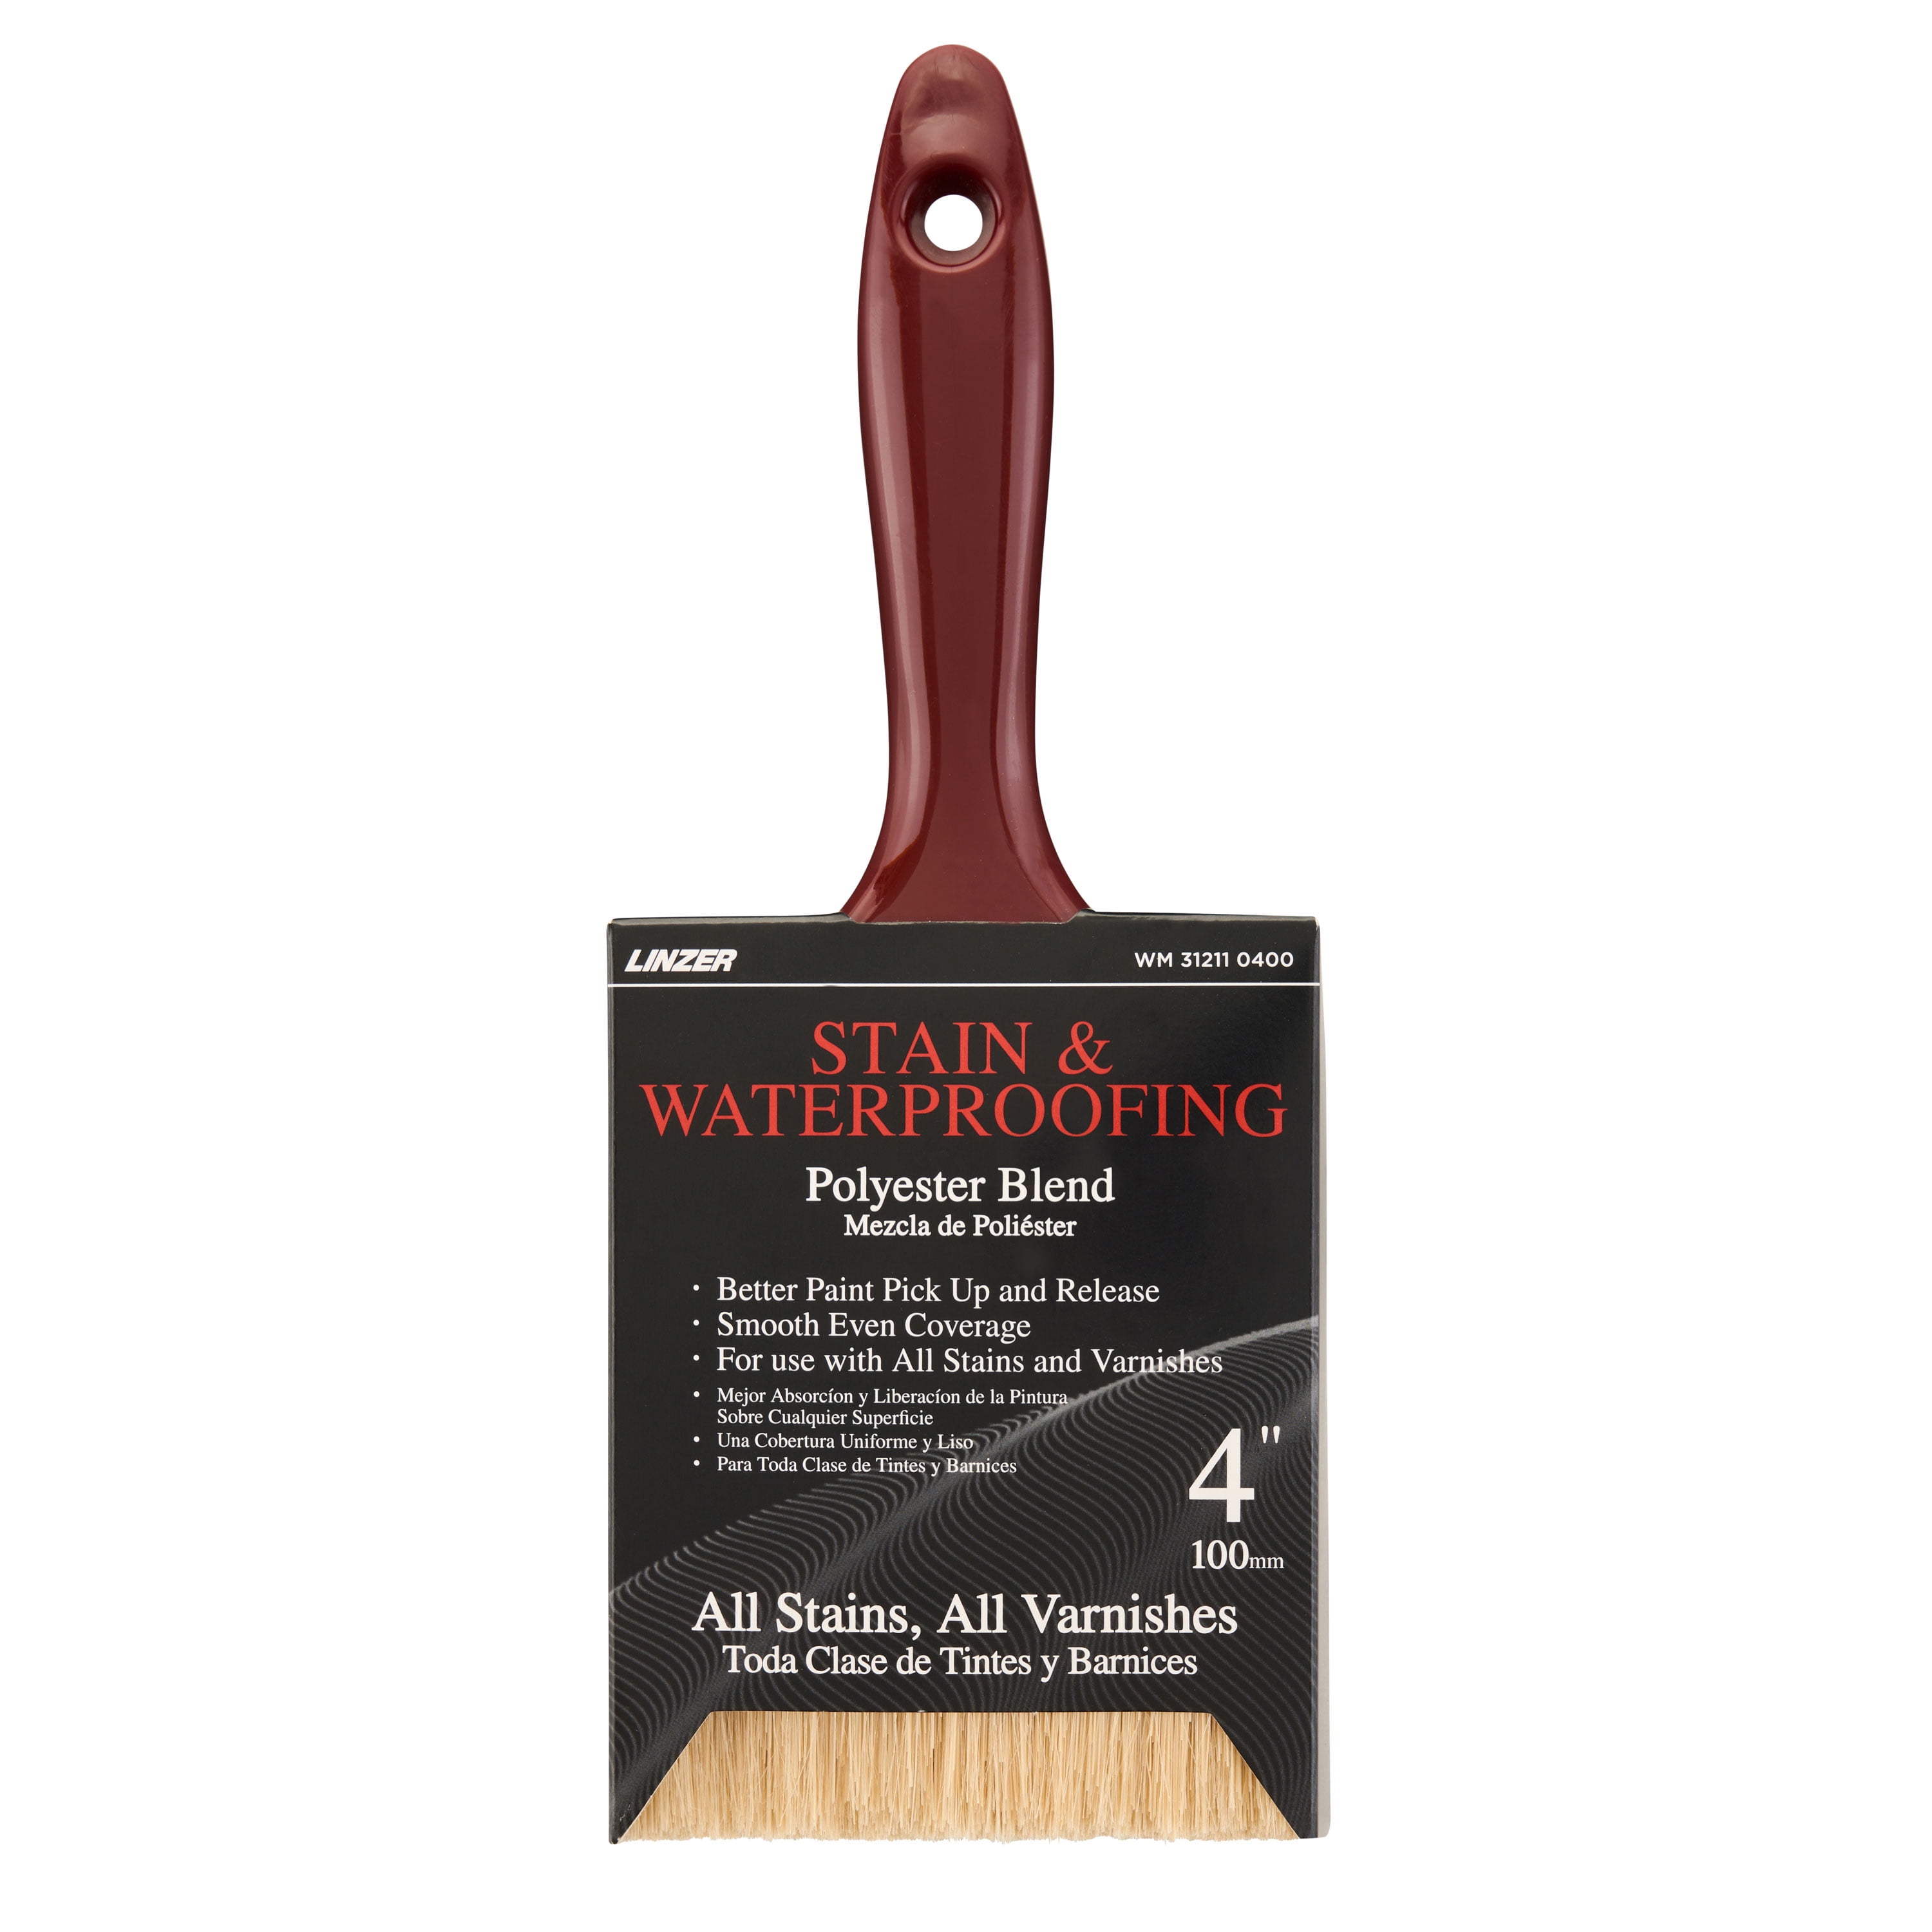 Linzer 4" Stain & Waterproofing Polyester Blend Flat Paint Brush